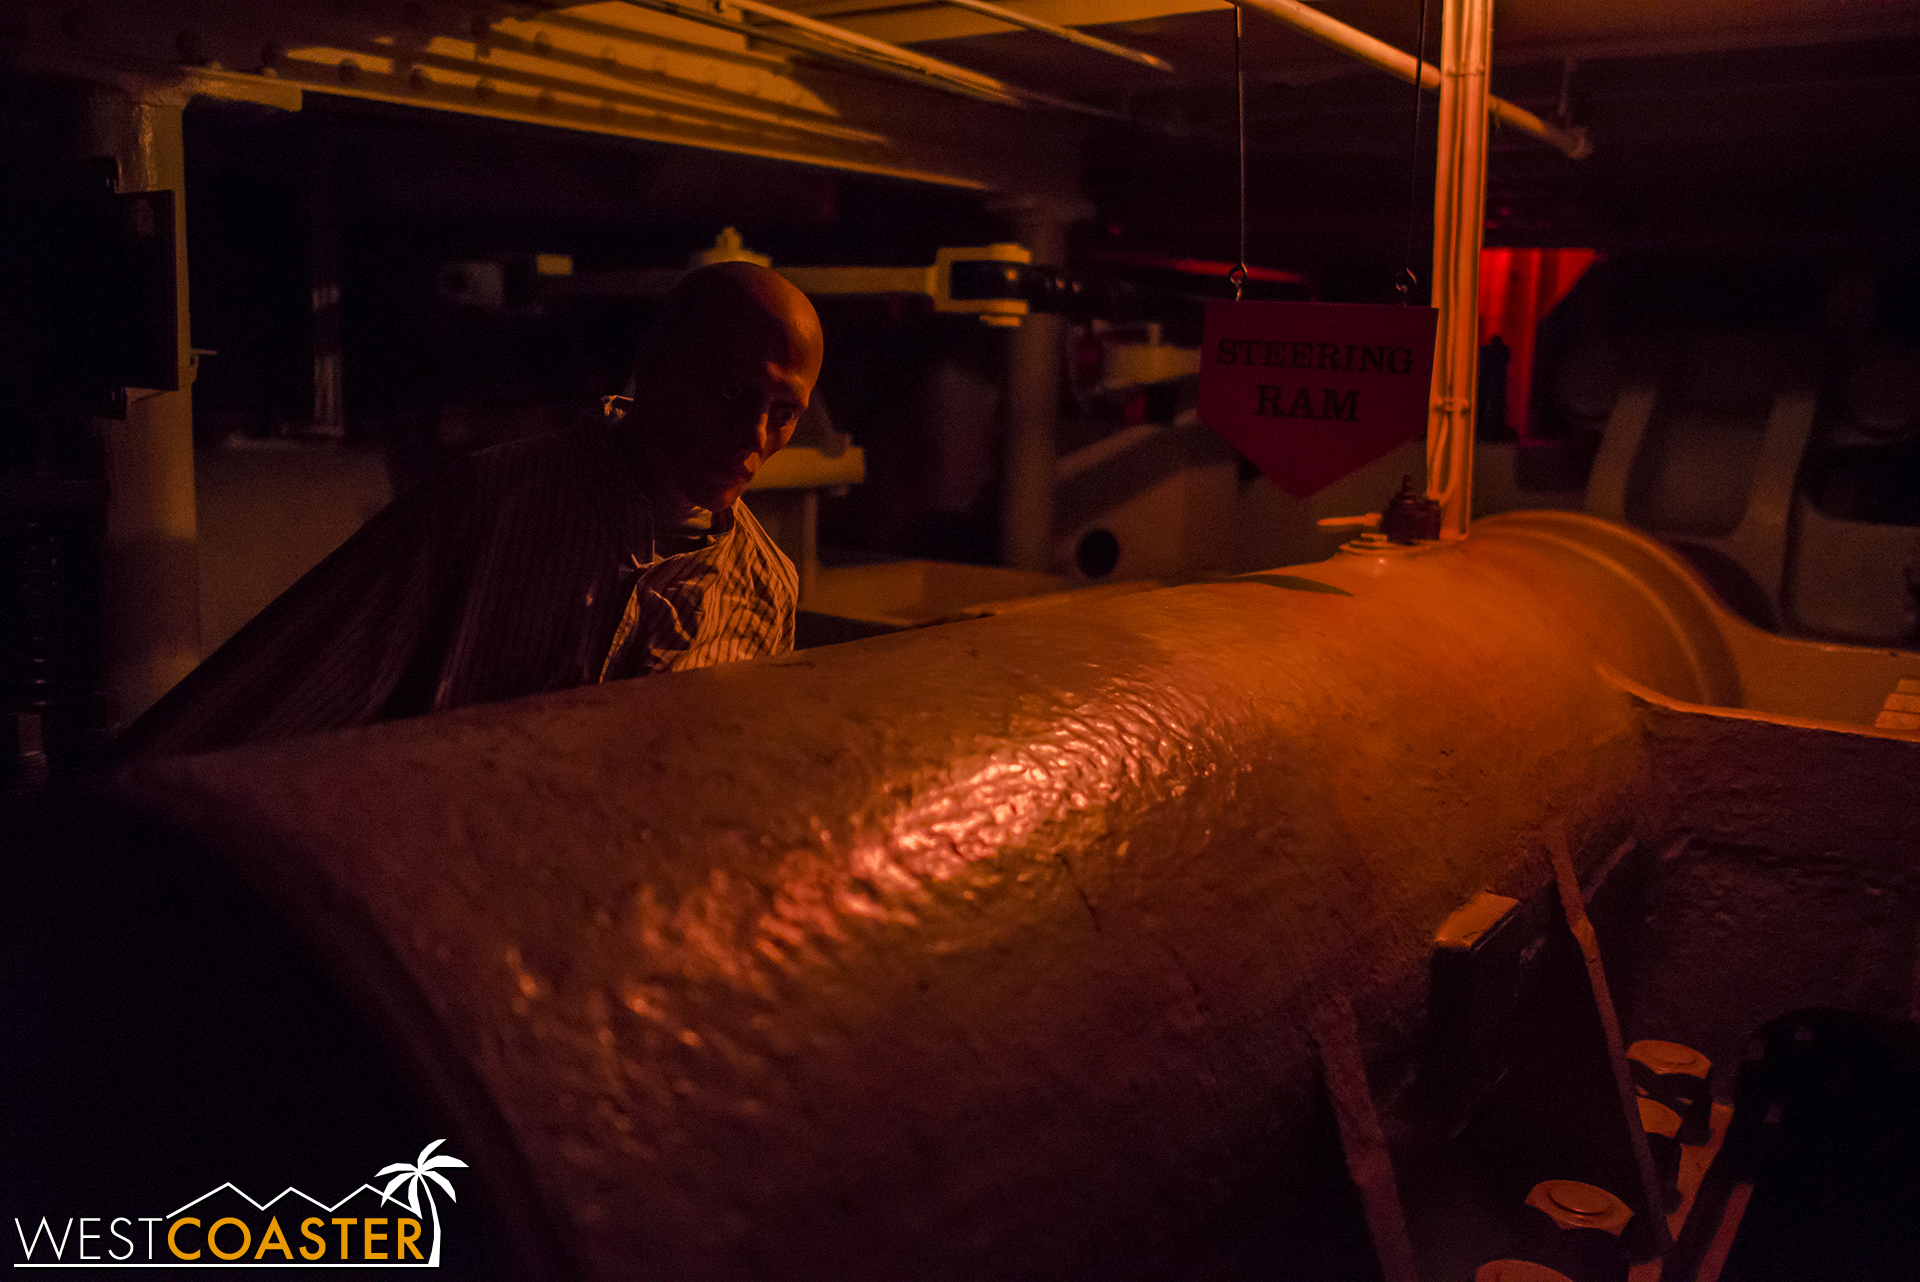  The maze goes through parts of the ship that have not previously been open during the Dark Harbor event. 